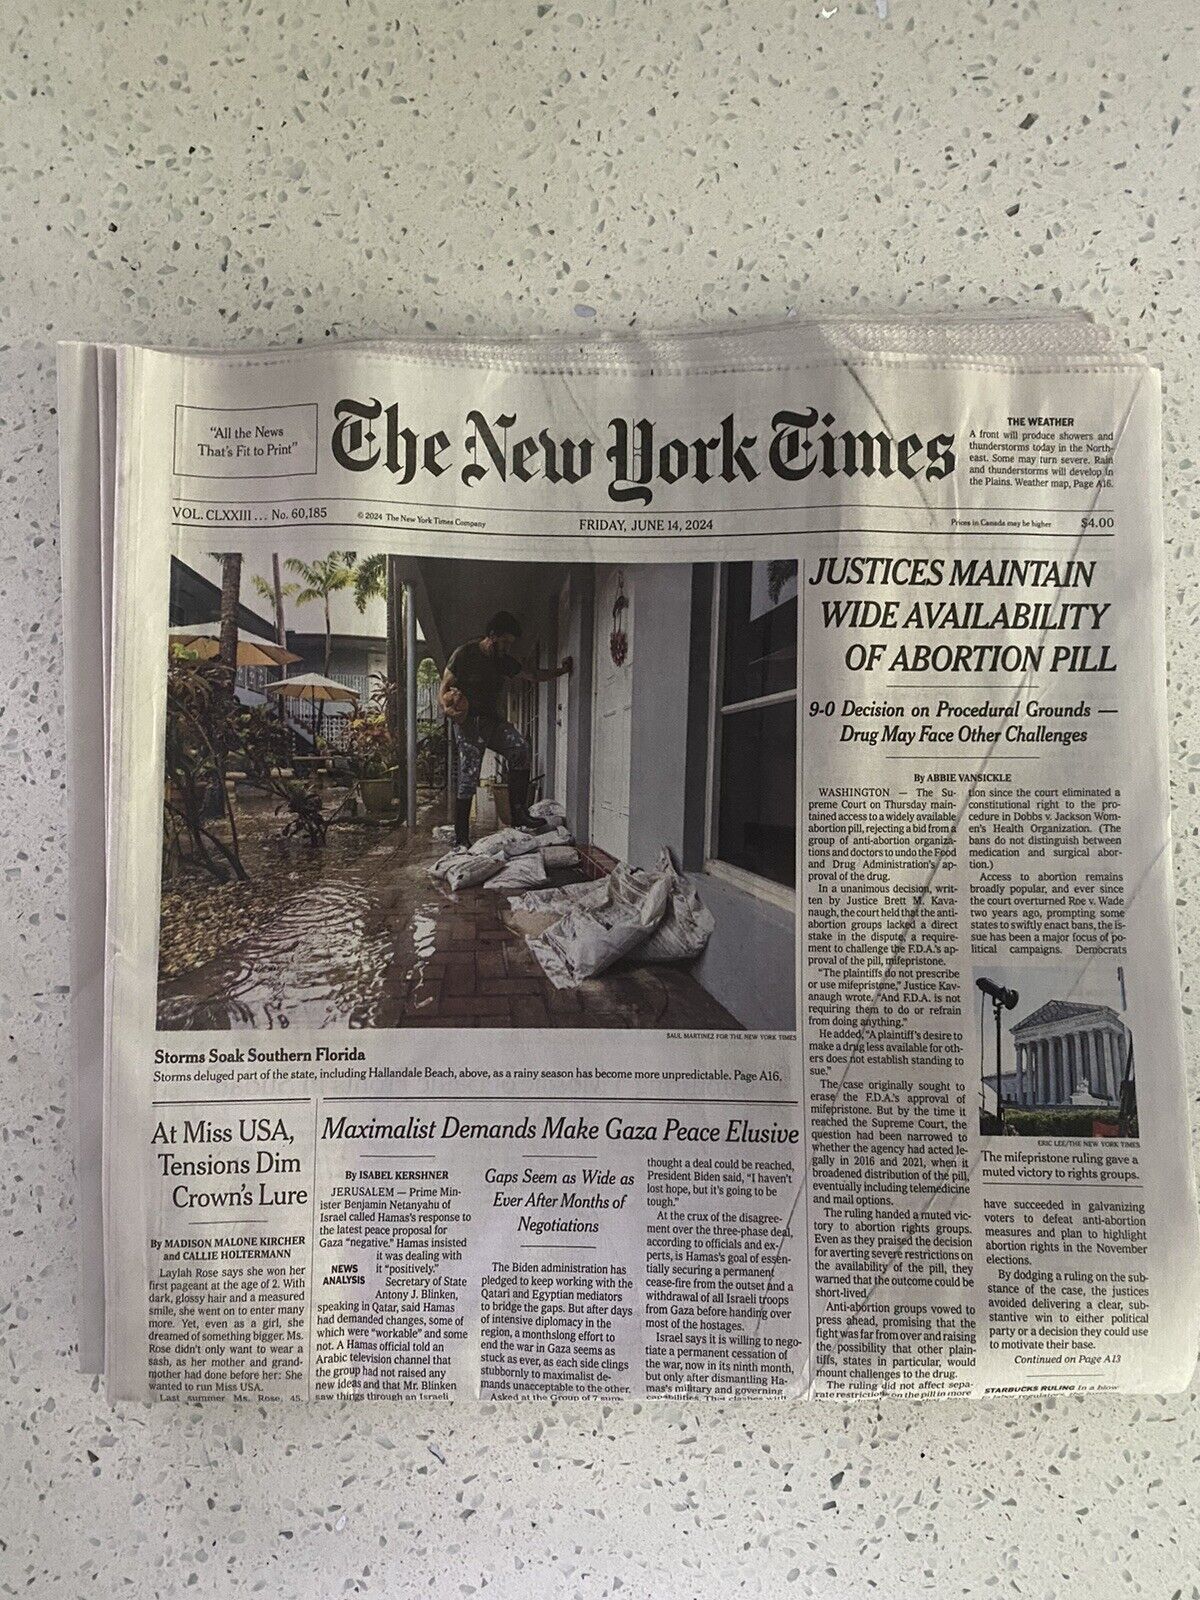 The New York Times Friday, June 14, 2024 Complete Print Newspaper (NEW)